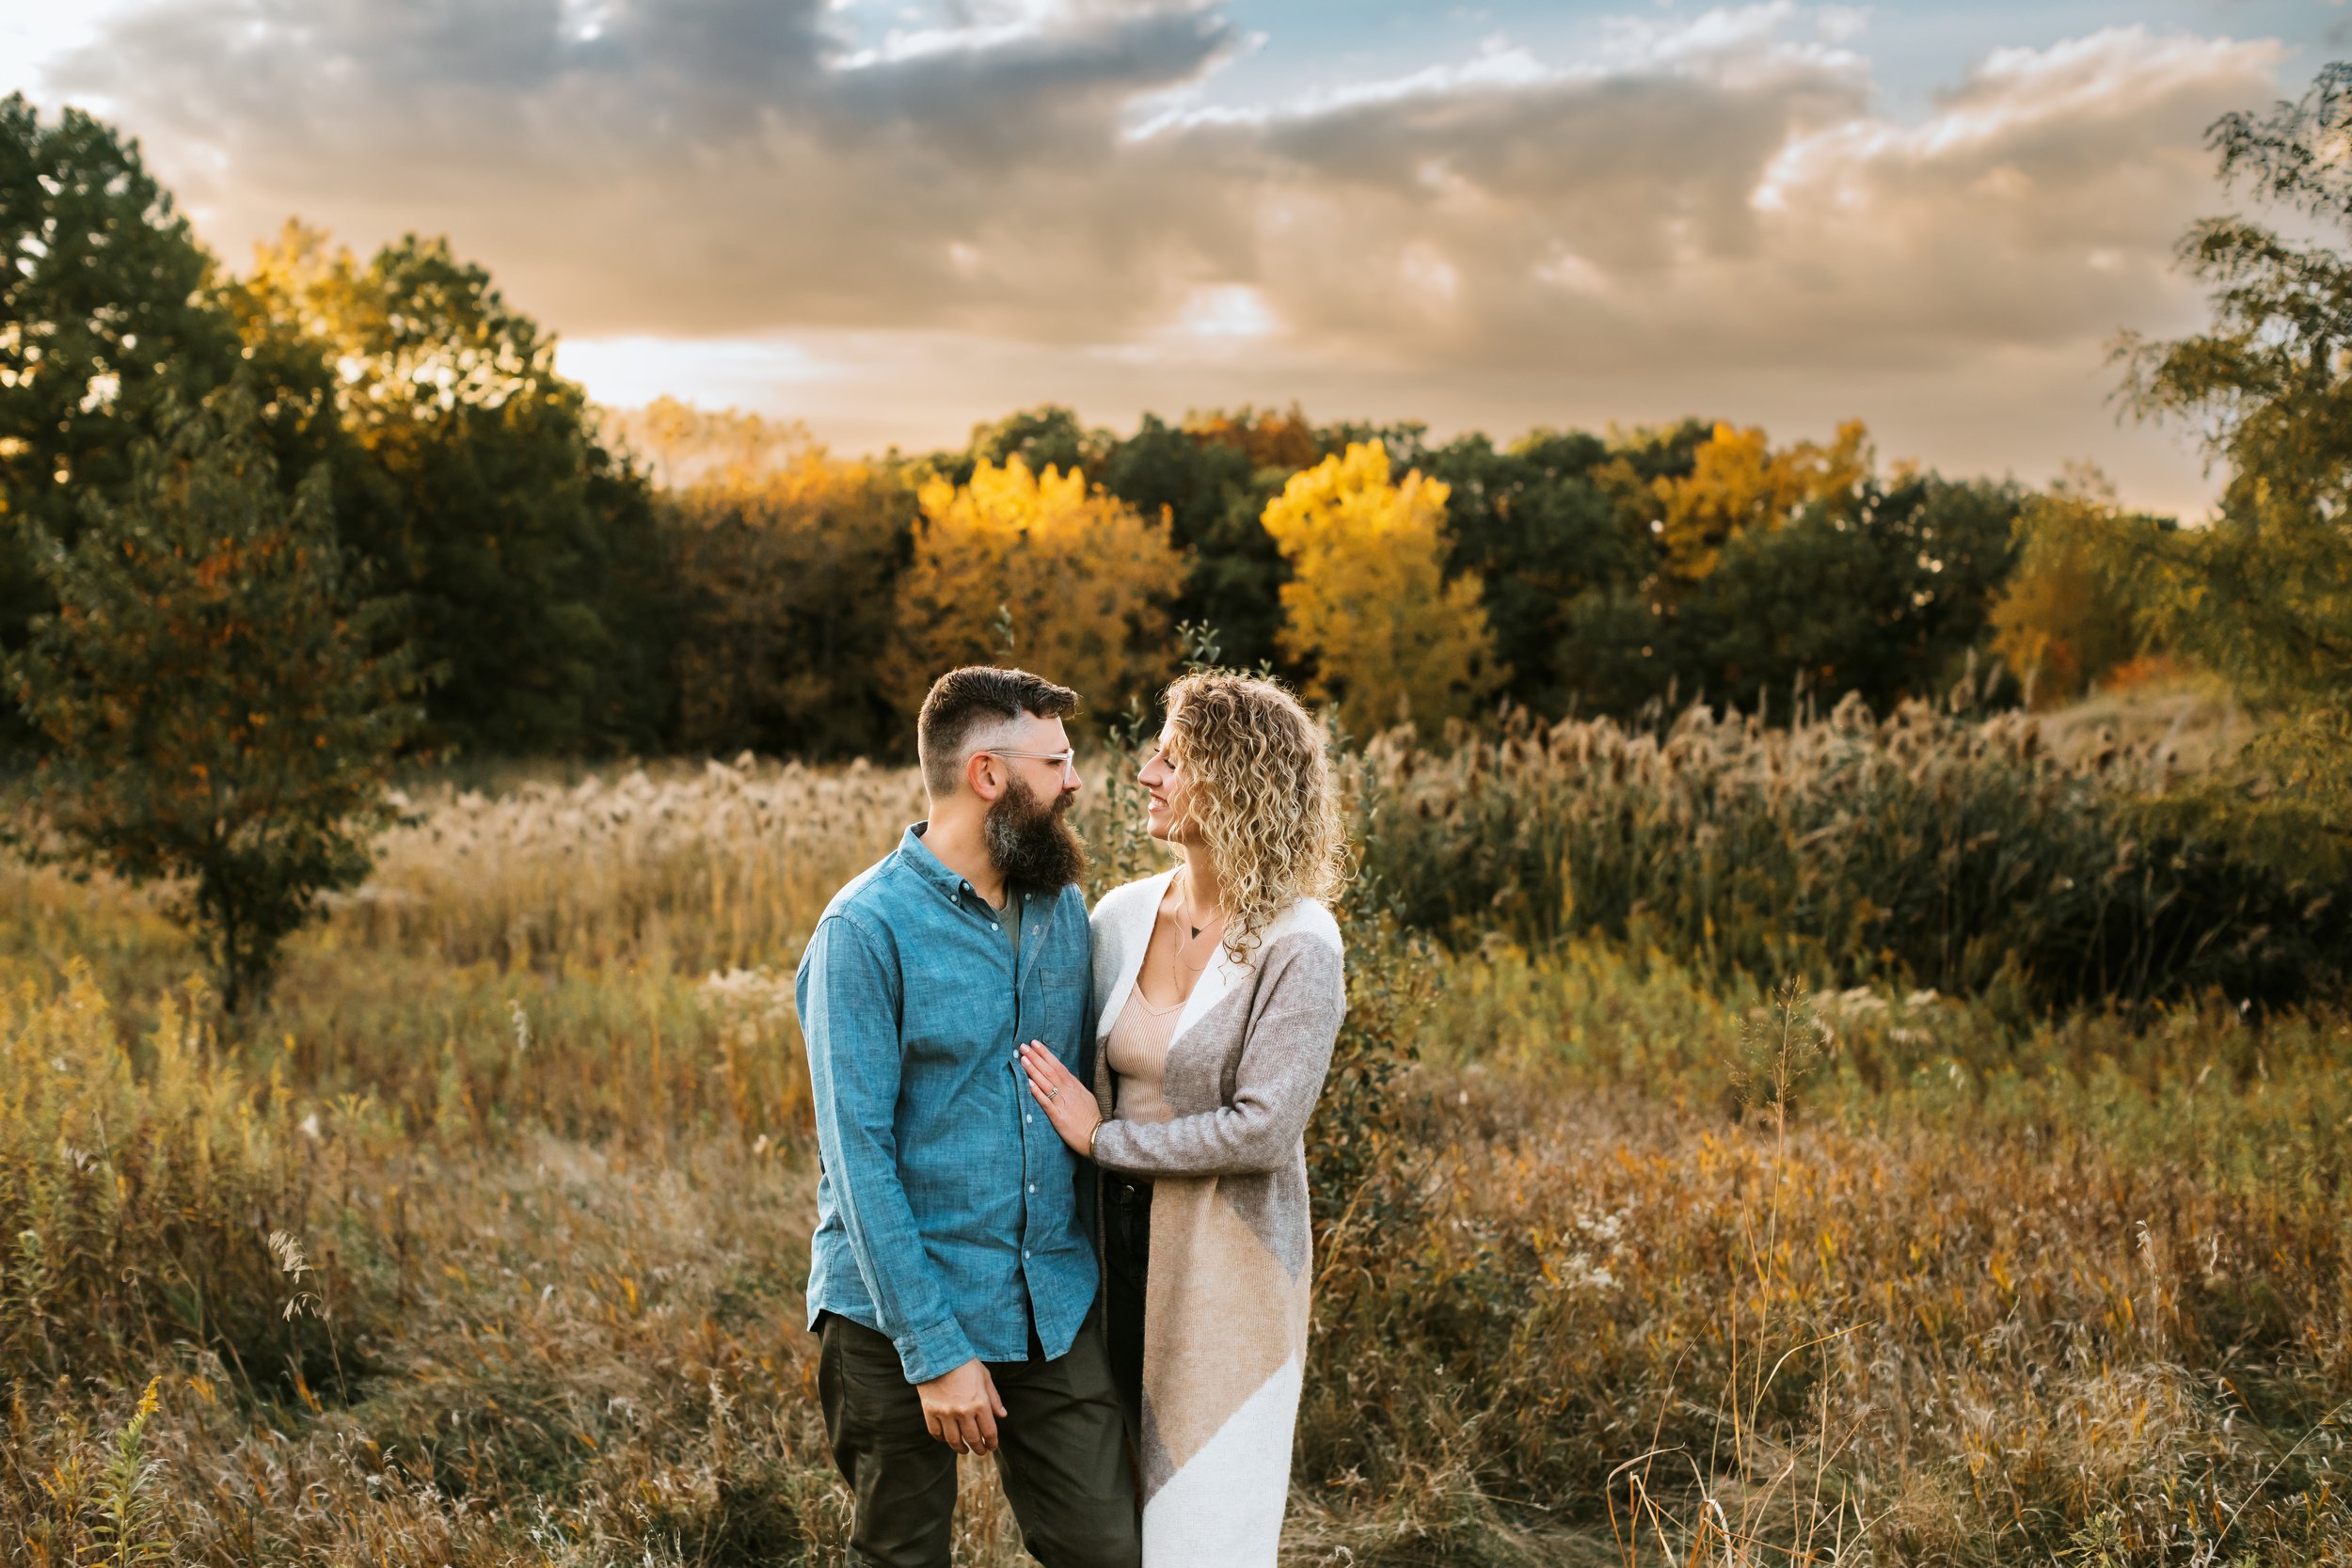  Family photographer Teala Ward Photography captures the sun setting behind a man and woman looking at one another. boho fam pic #TealaWardPhotography #TealaWardFamilies #IllinoisValleyfamilypics #fursibiling #Illinoisfamilyphotography #brother&amp;s